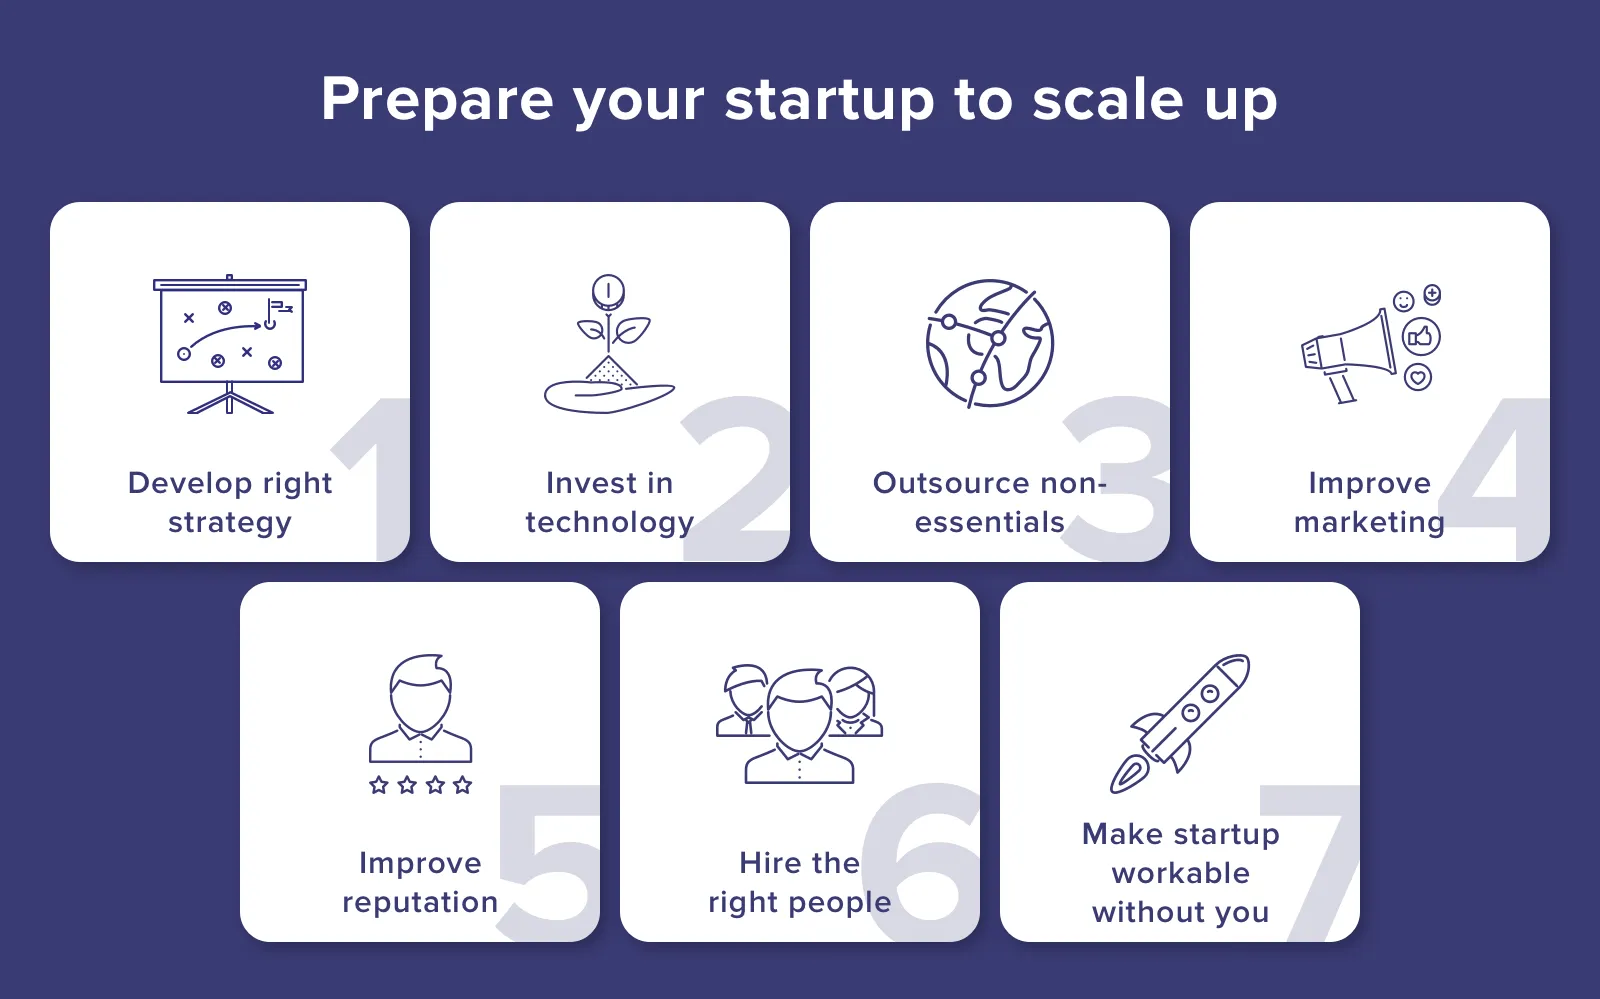 How to prepare a startup: step-by-step illustration